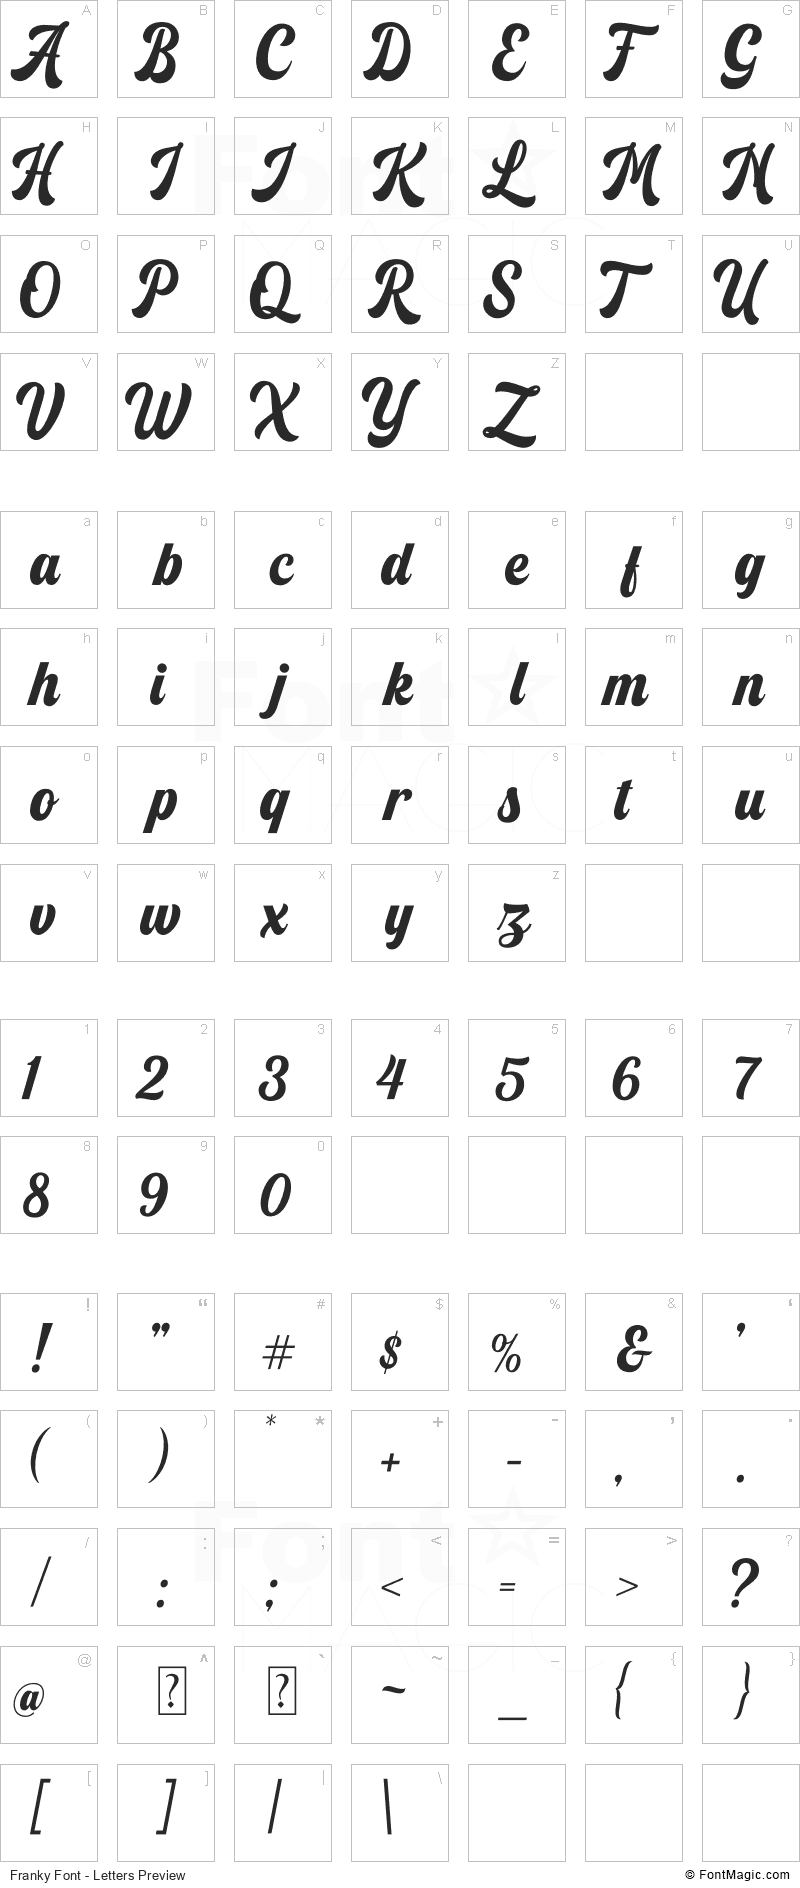 Franky Font - All Latters Preview Chart